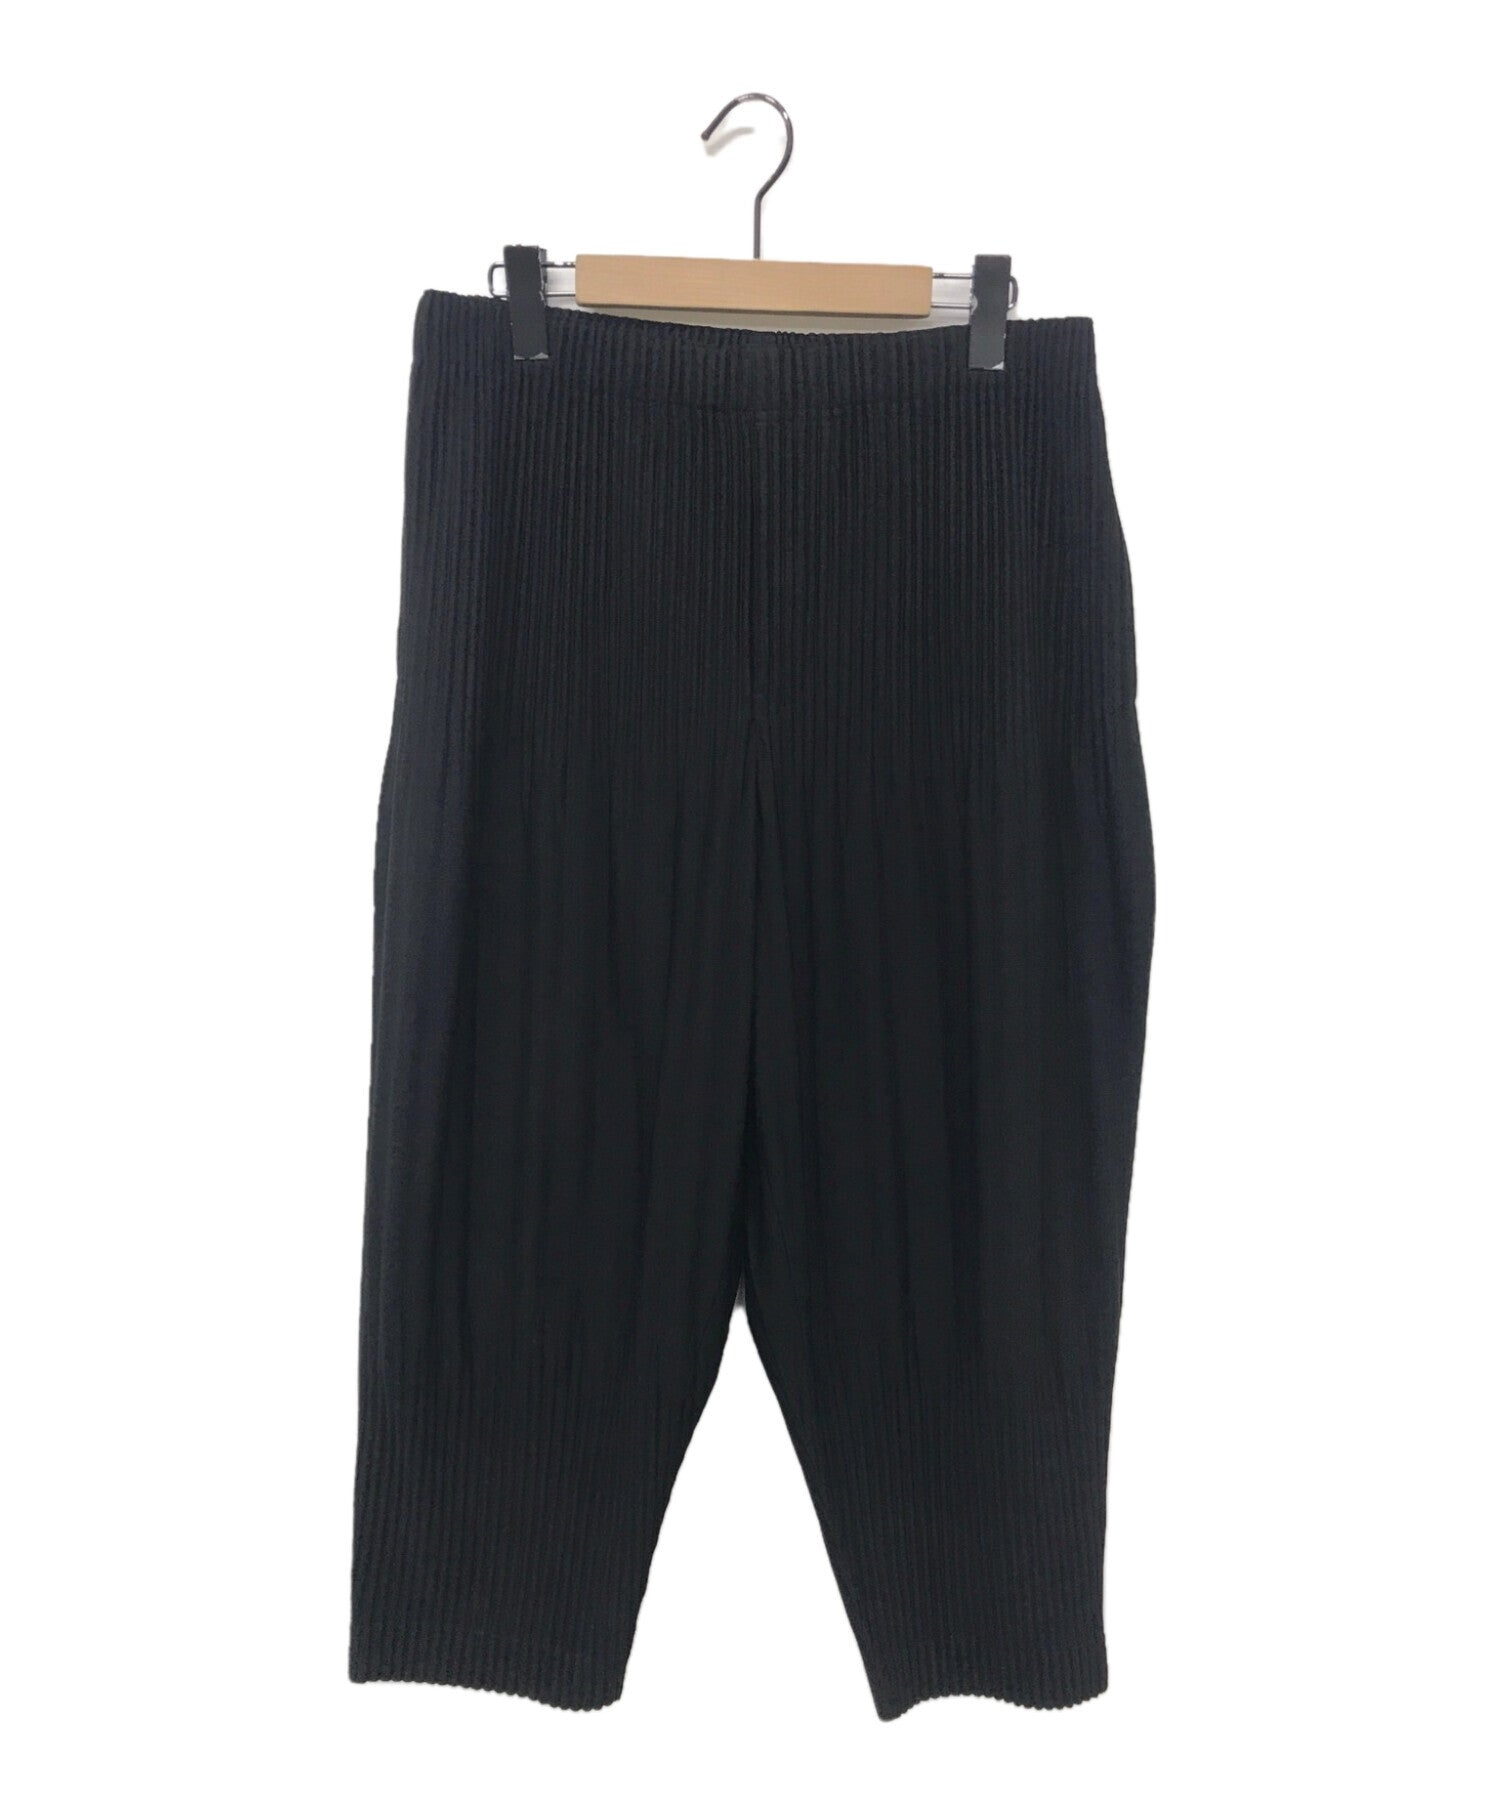 HOMME PLISSE ISSEY MIYAKE Pleated Thing Pad Saruel Pants HPJF